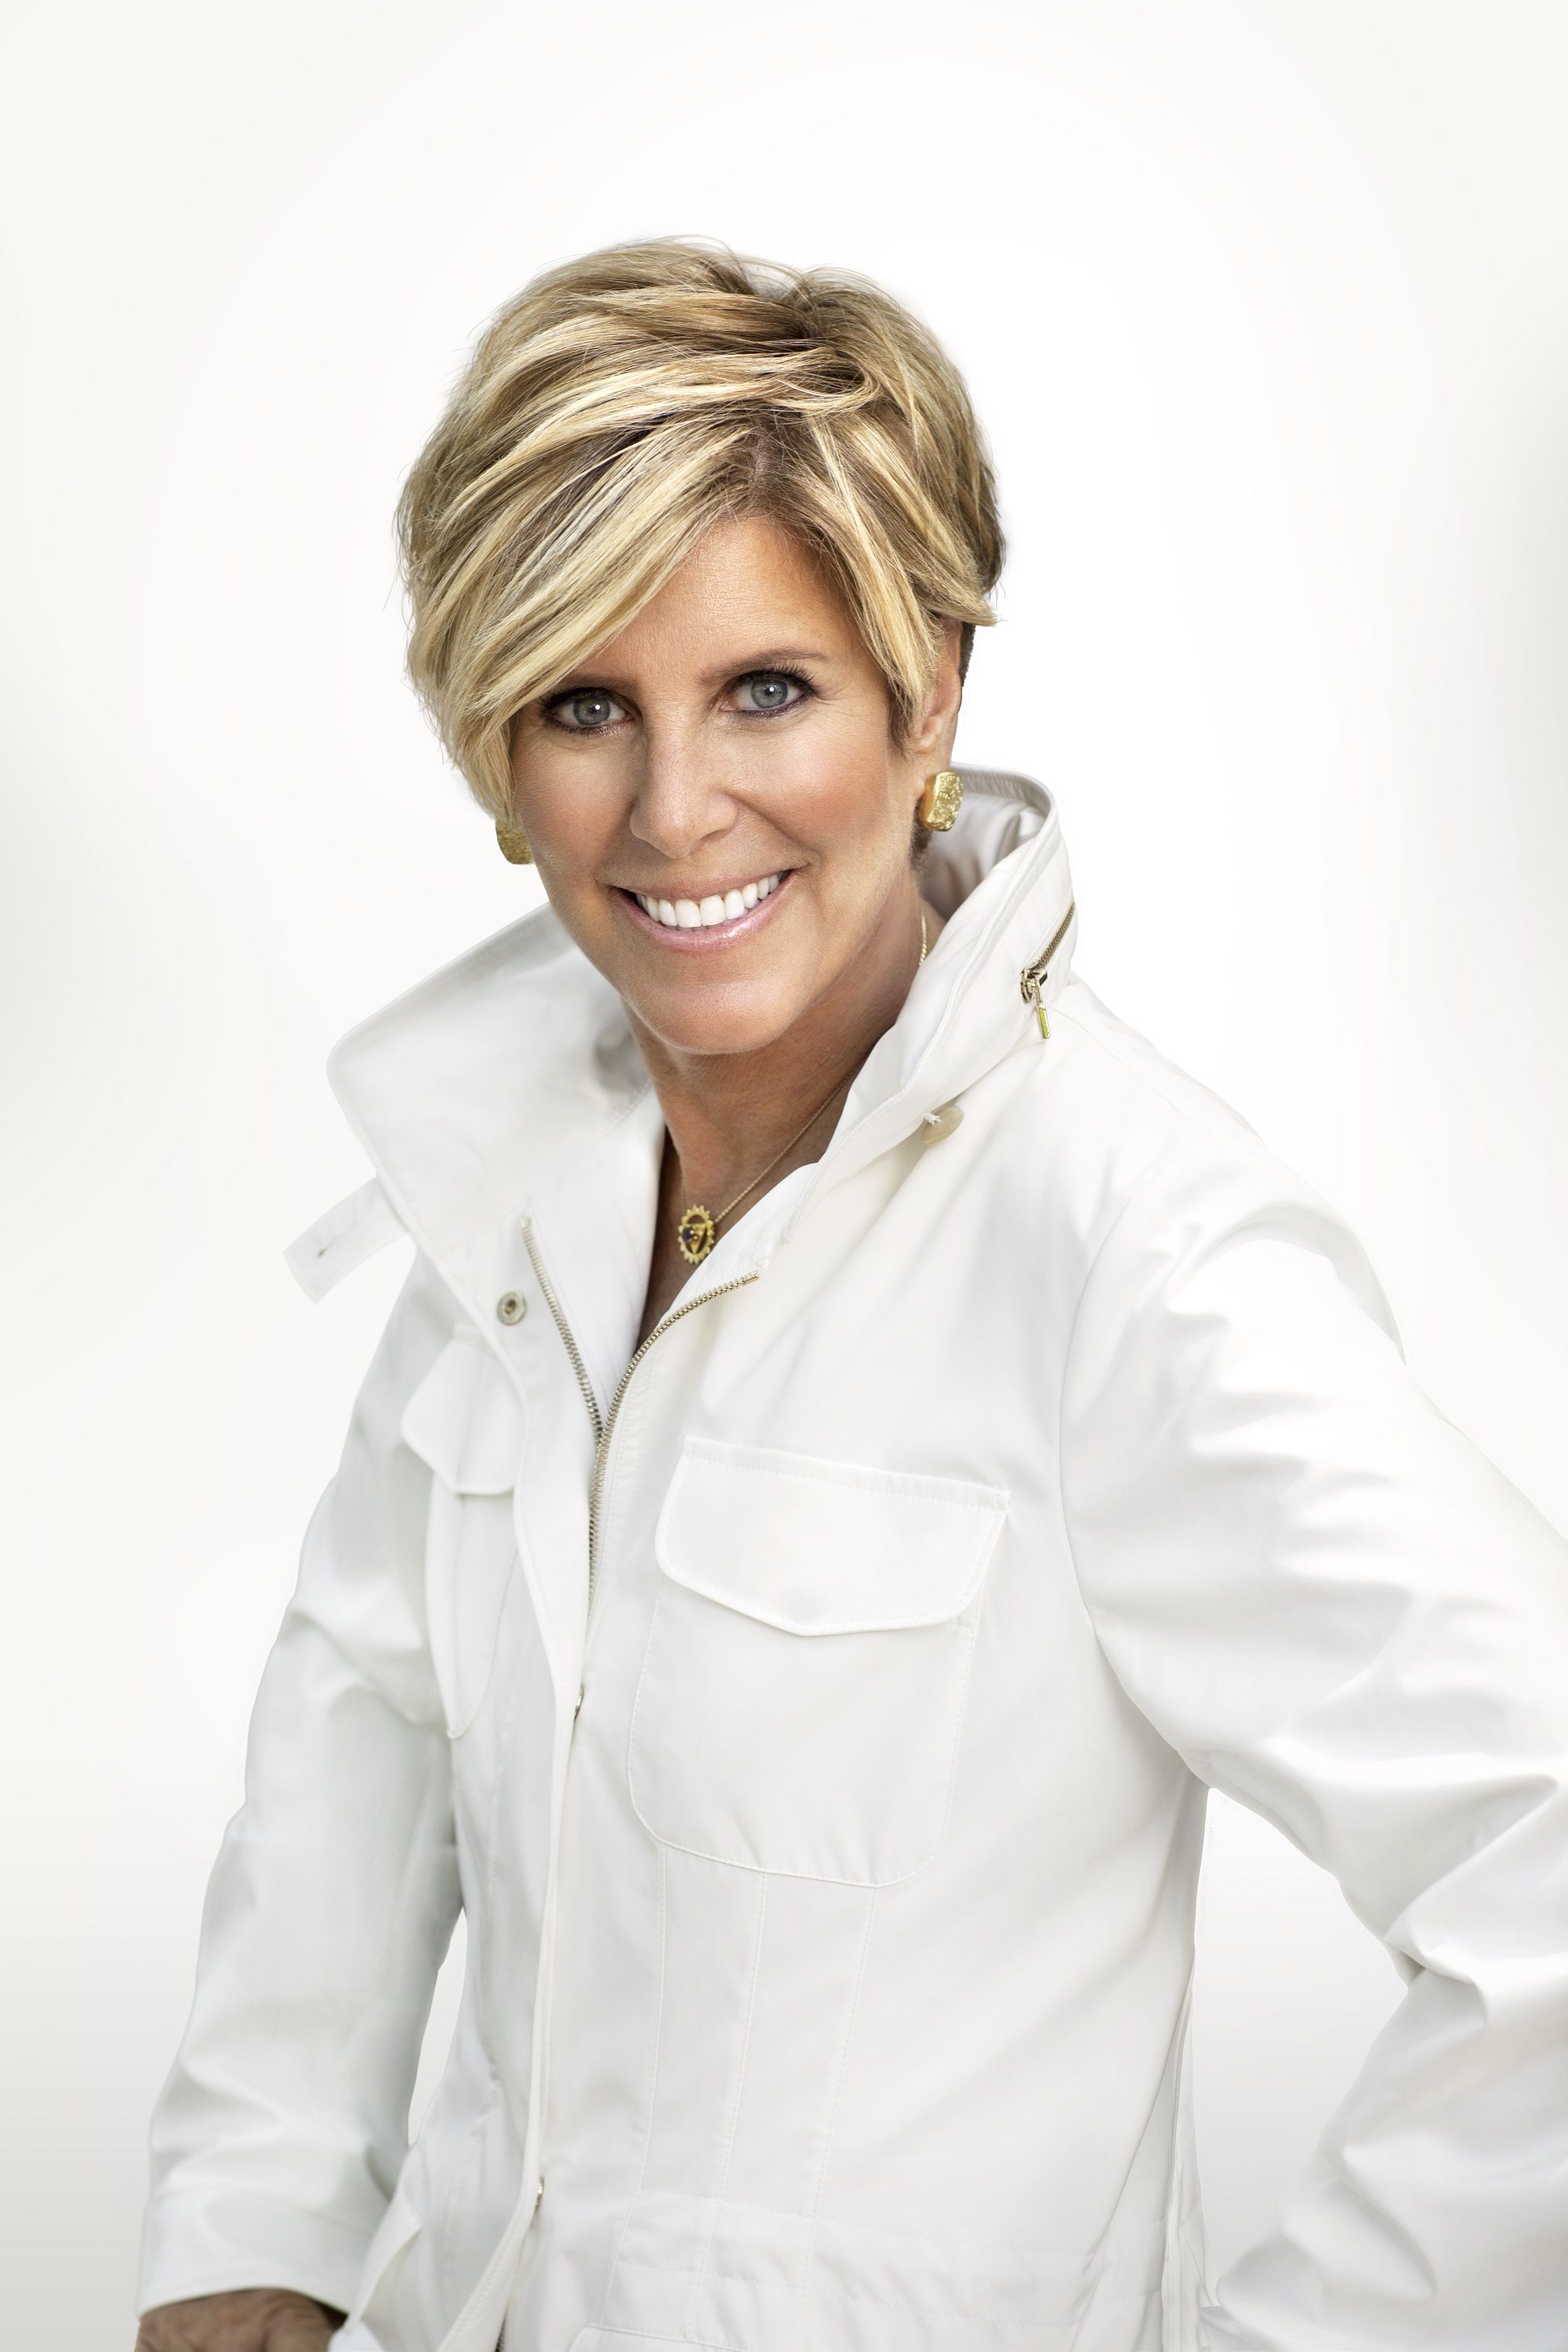 suze orman investing advice